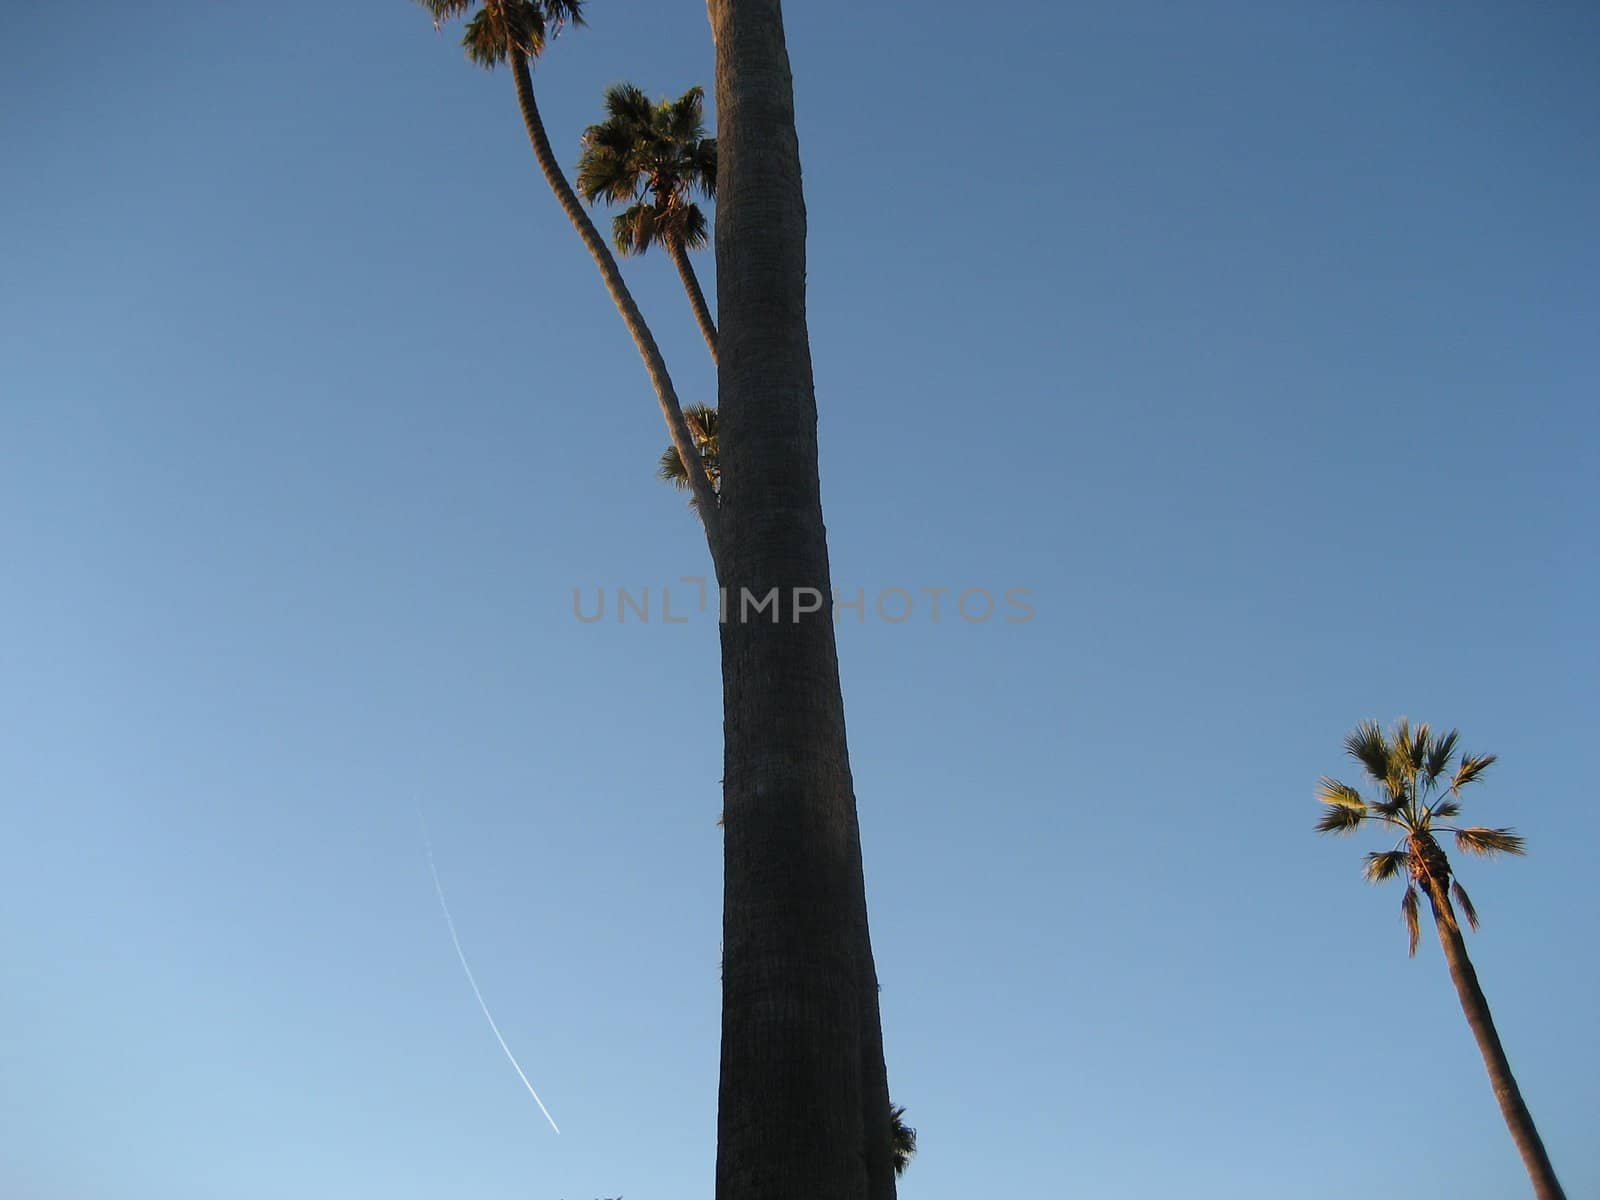 Palm tree against blue sky with plane plume trail
